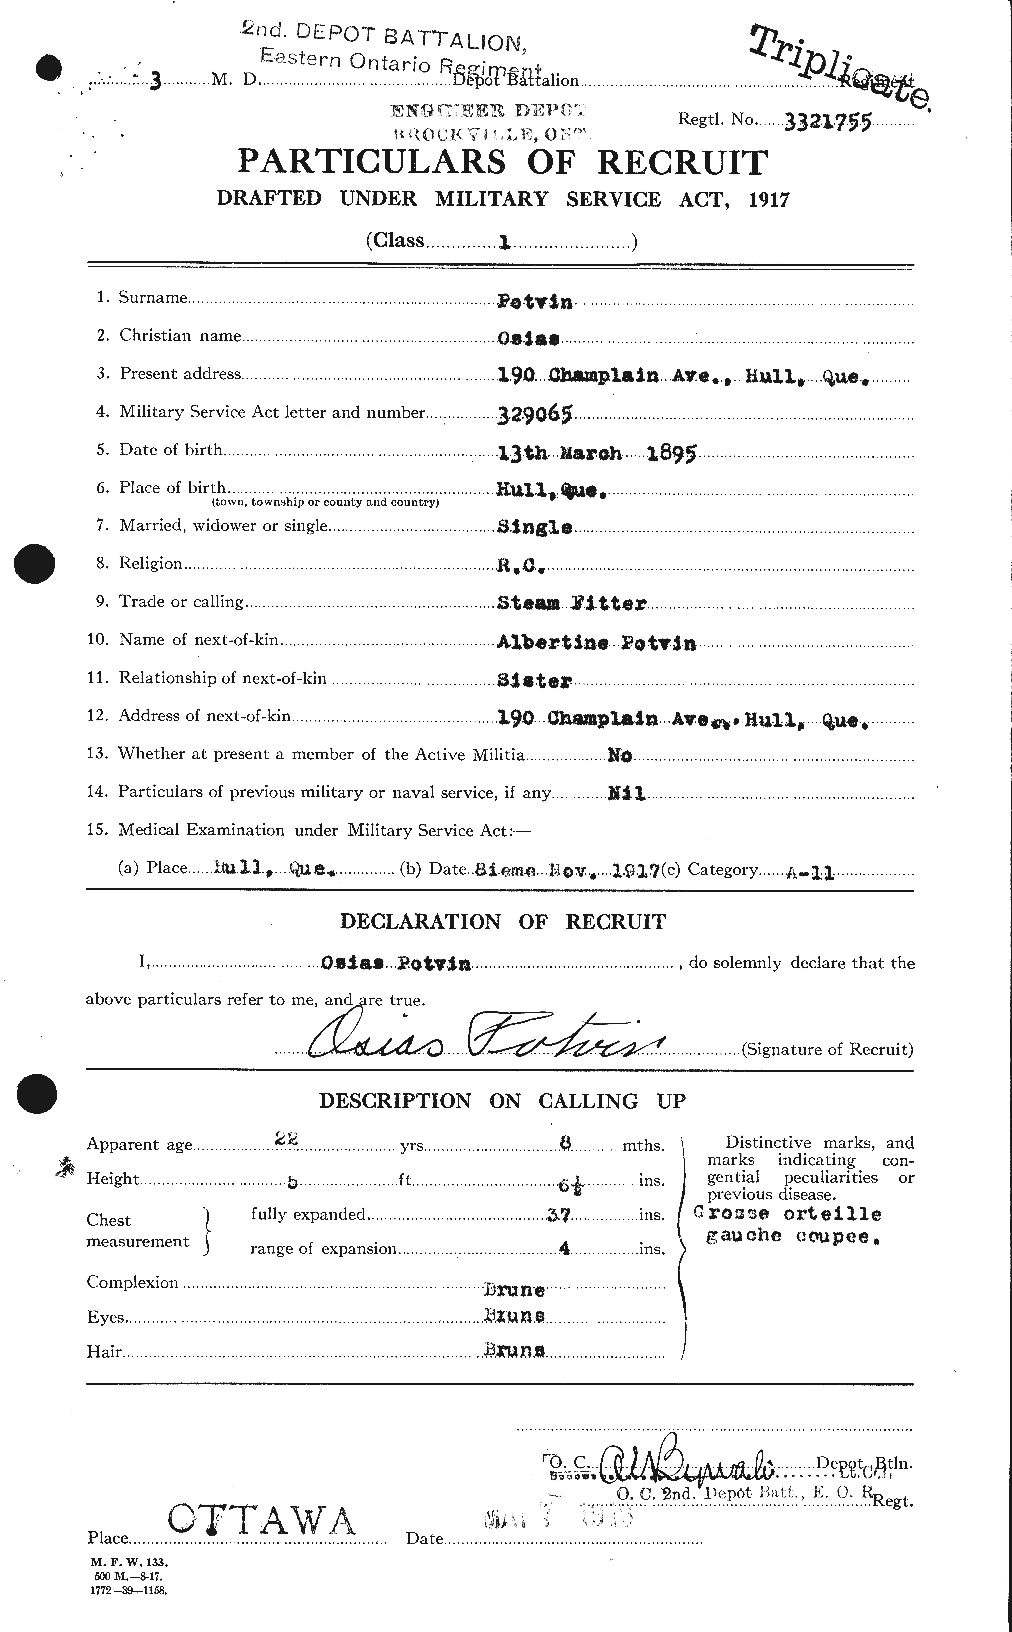 Personnel Records of the First World War - CEF 584652a